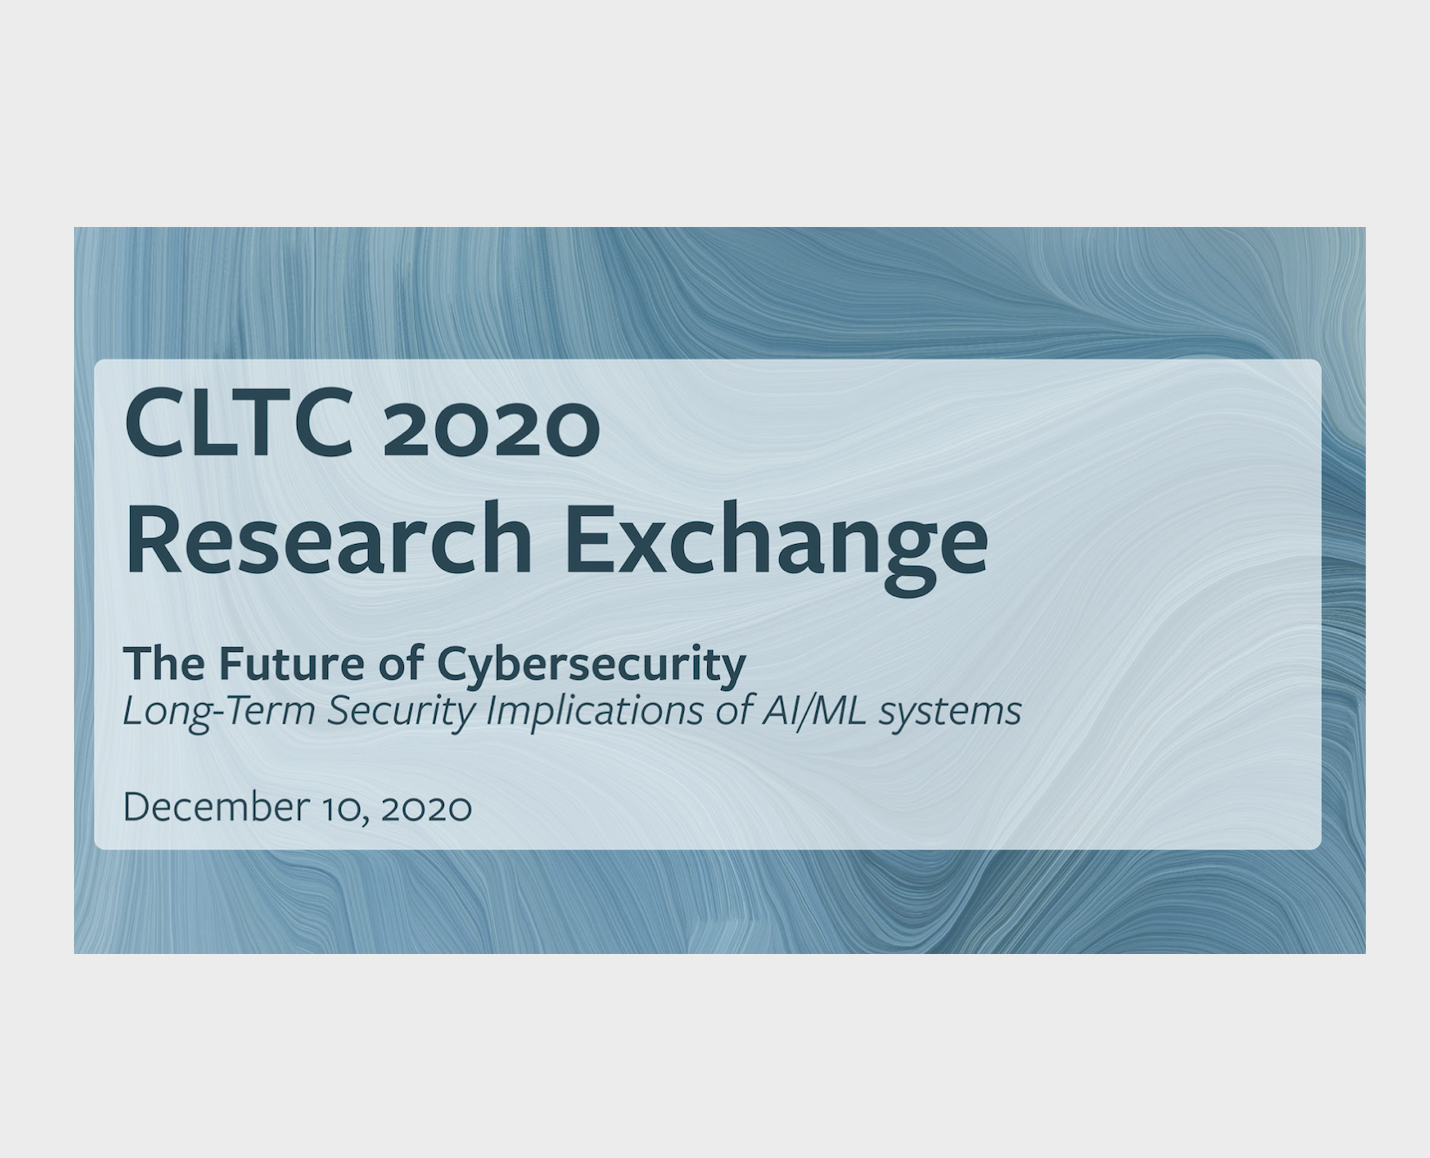 Cover Image - CLTC Research Exchange